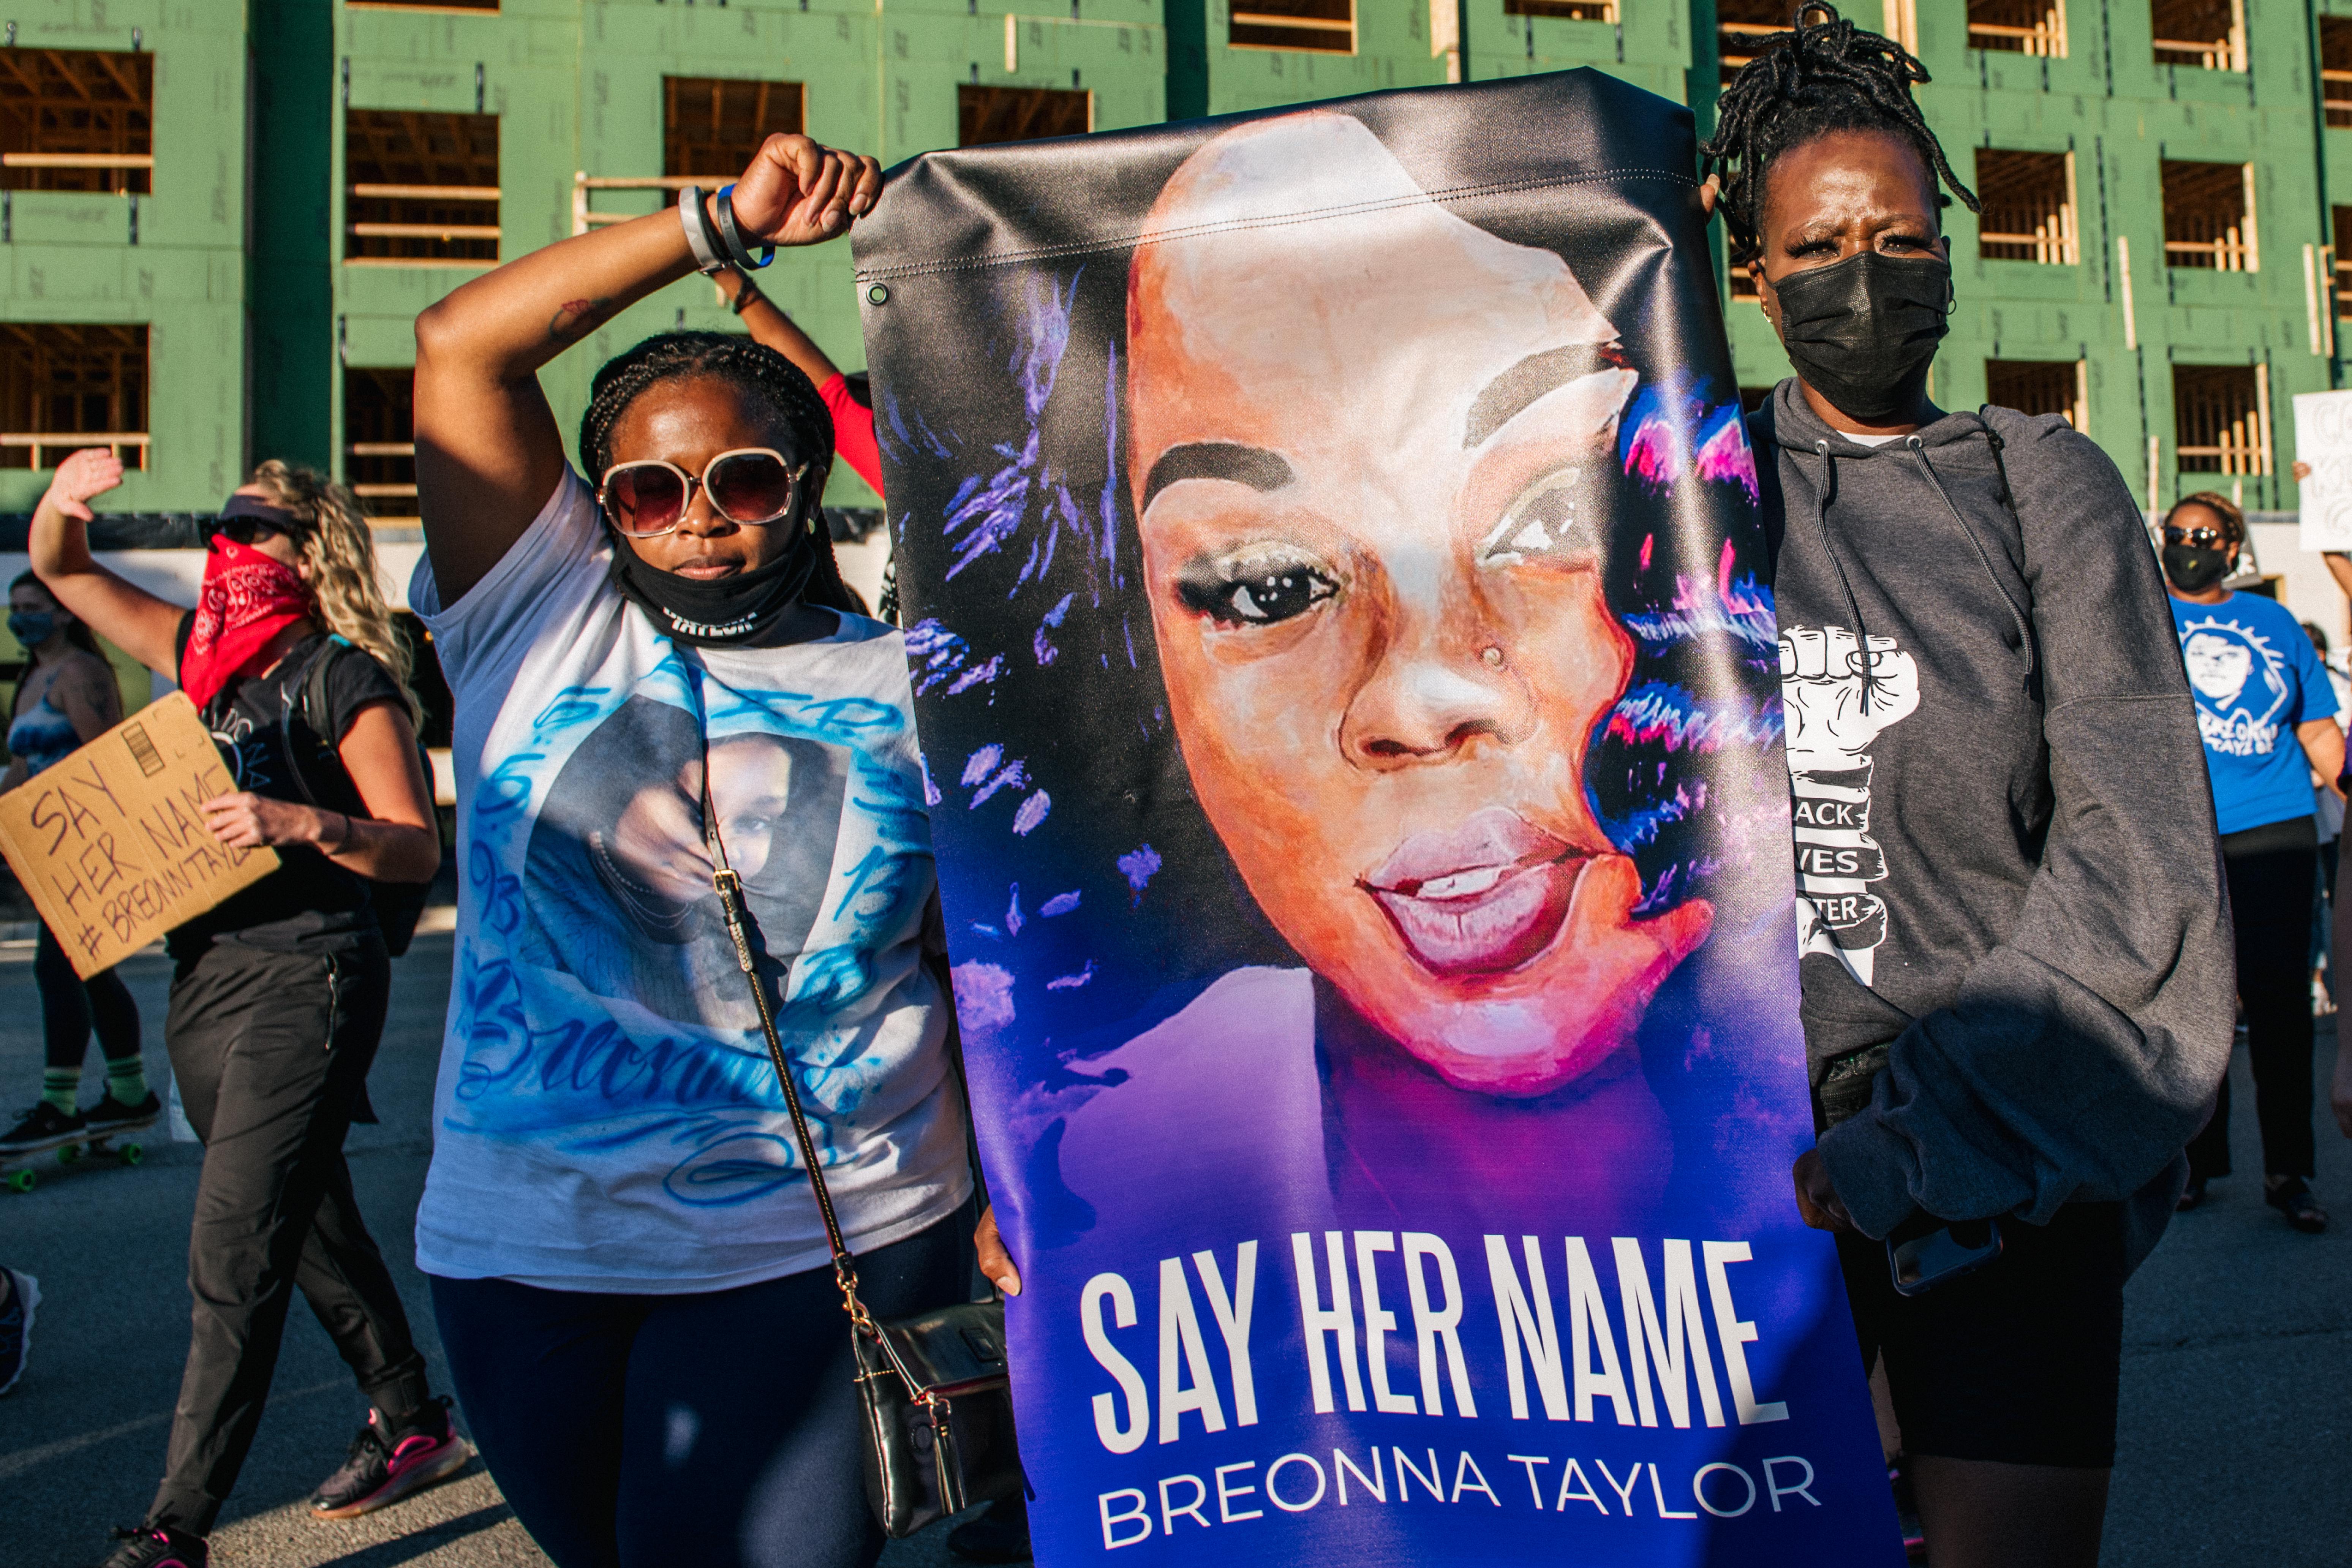 Two women at the front of a march hold a sign featuring an illustration of Breonna Taylor's face and the words "Say her name, Breonna Taylor."